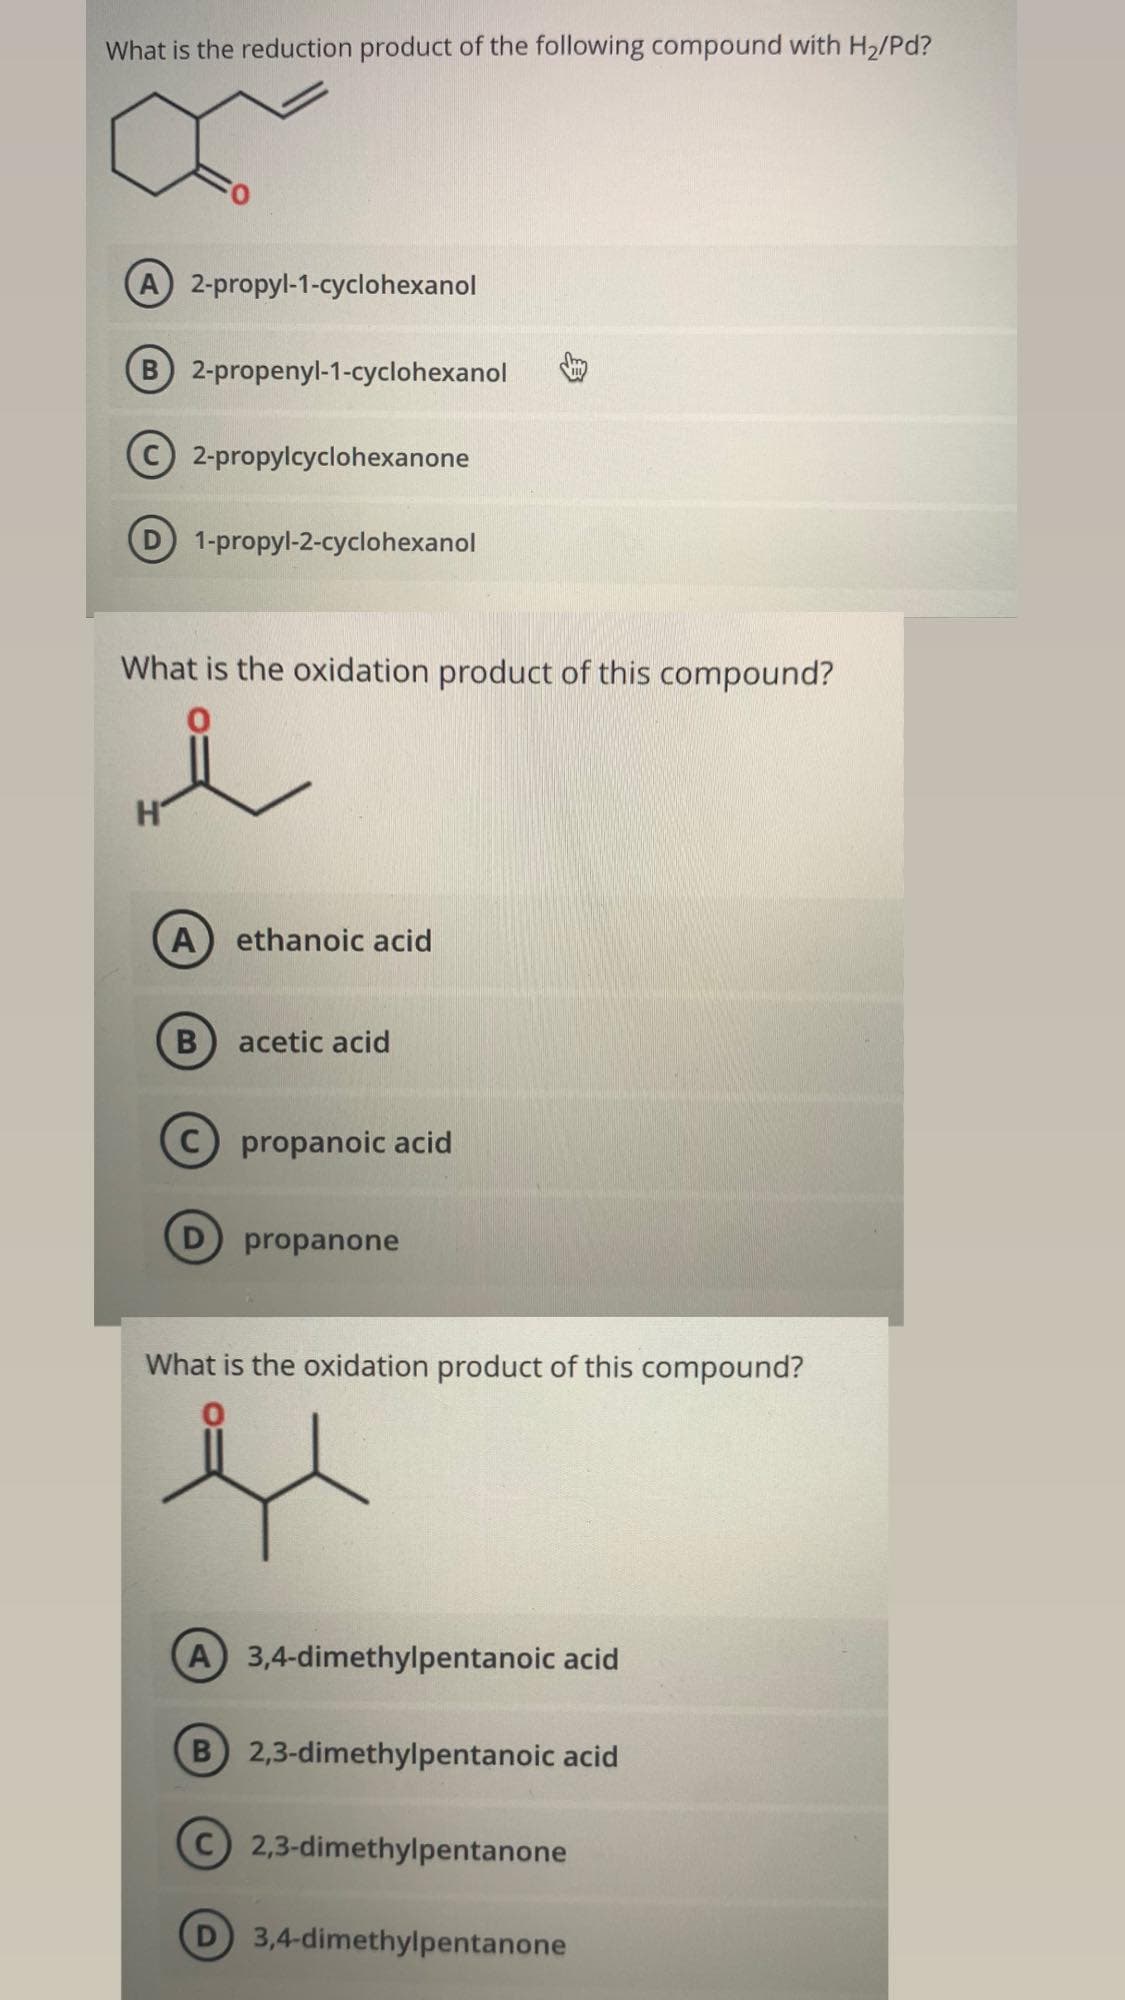 What is the reduction product of the following compound with H2/Pd?
A 2-propyl-1-cyclohexanol
B 2-propenyl-1-cyclohexanol
C2-propylcyclohexanone
D 1-propyl-2-cyclohexanol
What is the oxidation product of this compound?
H'
A ethanoic acid
acetic acid
propanoic acid
D propanone
What is the oxidation product of this compound?
A 3,4-dimethylpentanoic acid
B 2,3-dimethylpentanoic acid
C2,3-dimethylpentanone
3,4-dimethylpentanone
